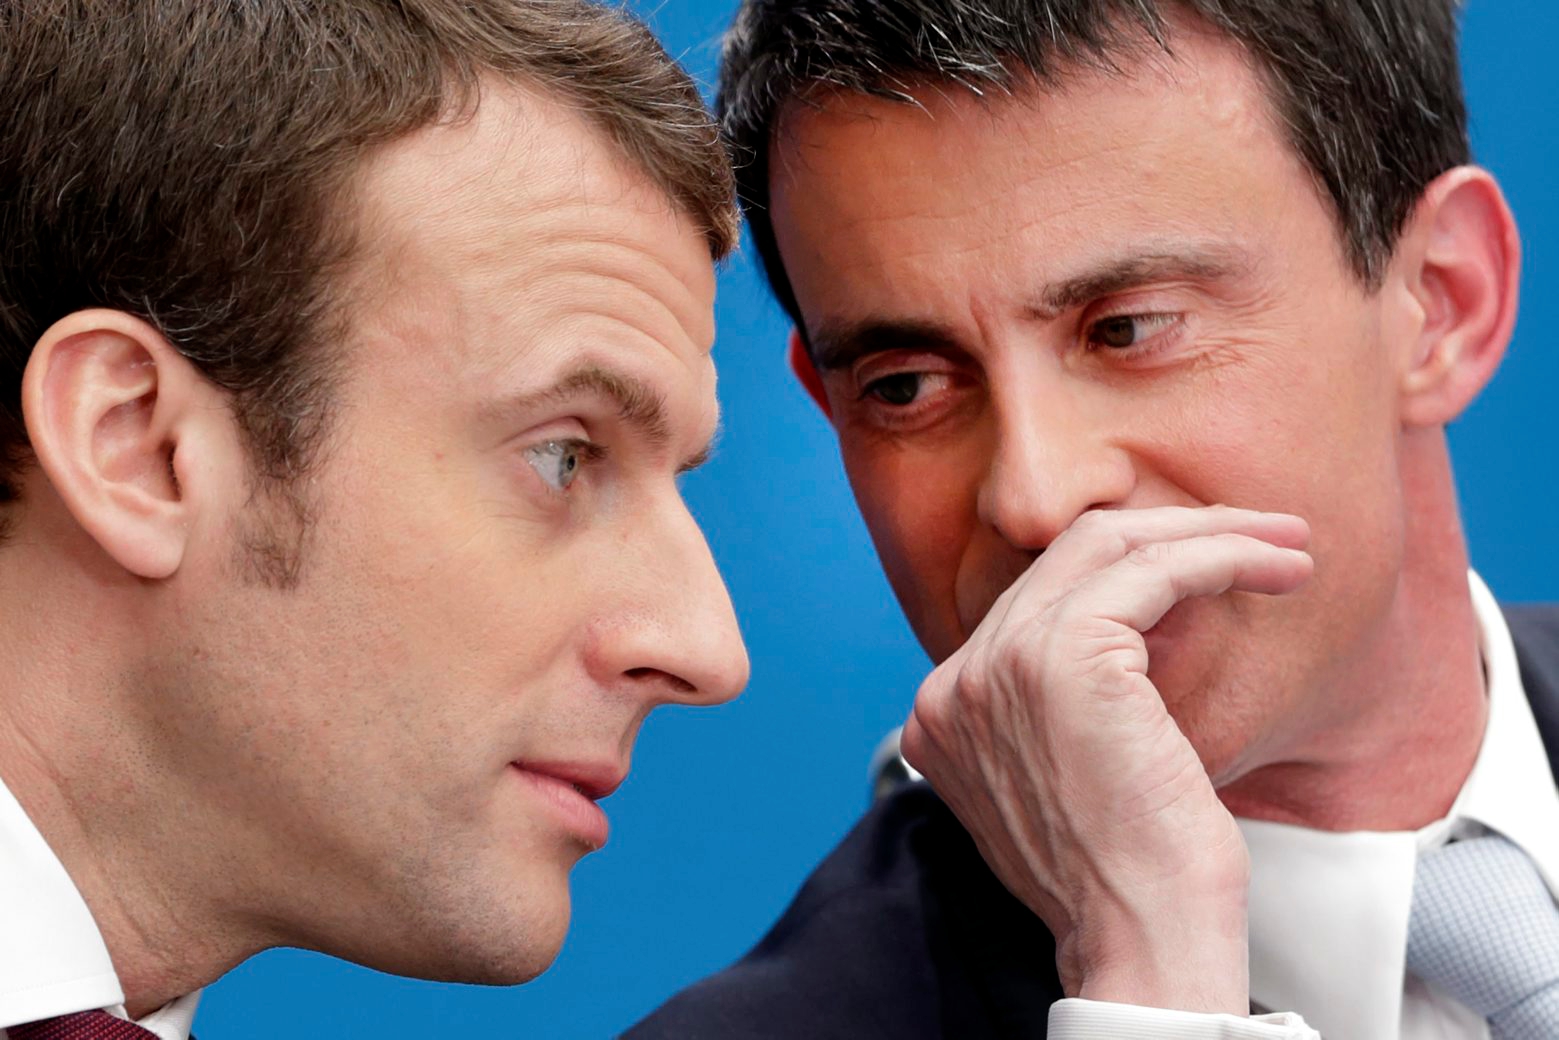 FILE - In this April 8, 2015 file photo, then French prime minister Manuel Valls, right, speaks with then economy minister Macron during in Paris. French centrist presidential hopeful Emmanuel Macron has won the backing of Socialist former prime minister Manuel Valls. (AP Photo/Philippe Wojazer/Pool, File) France Election